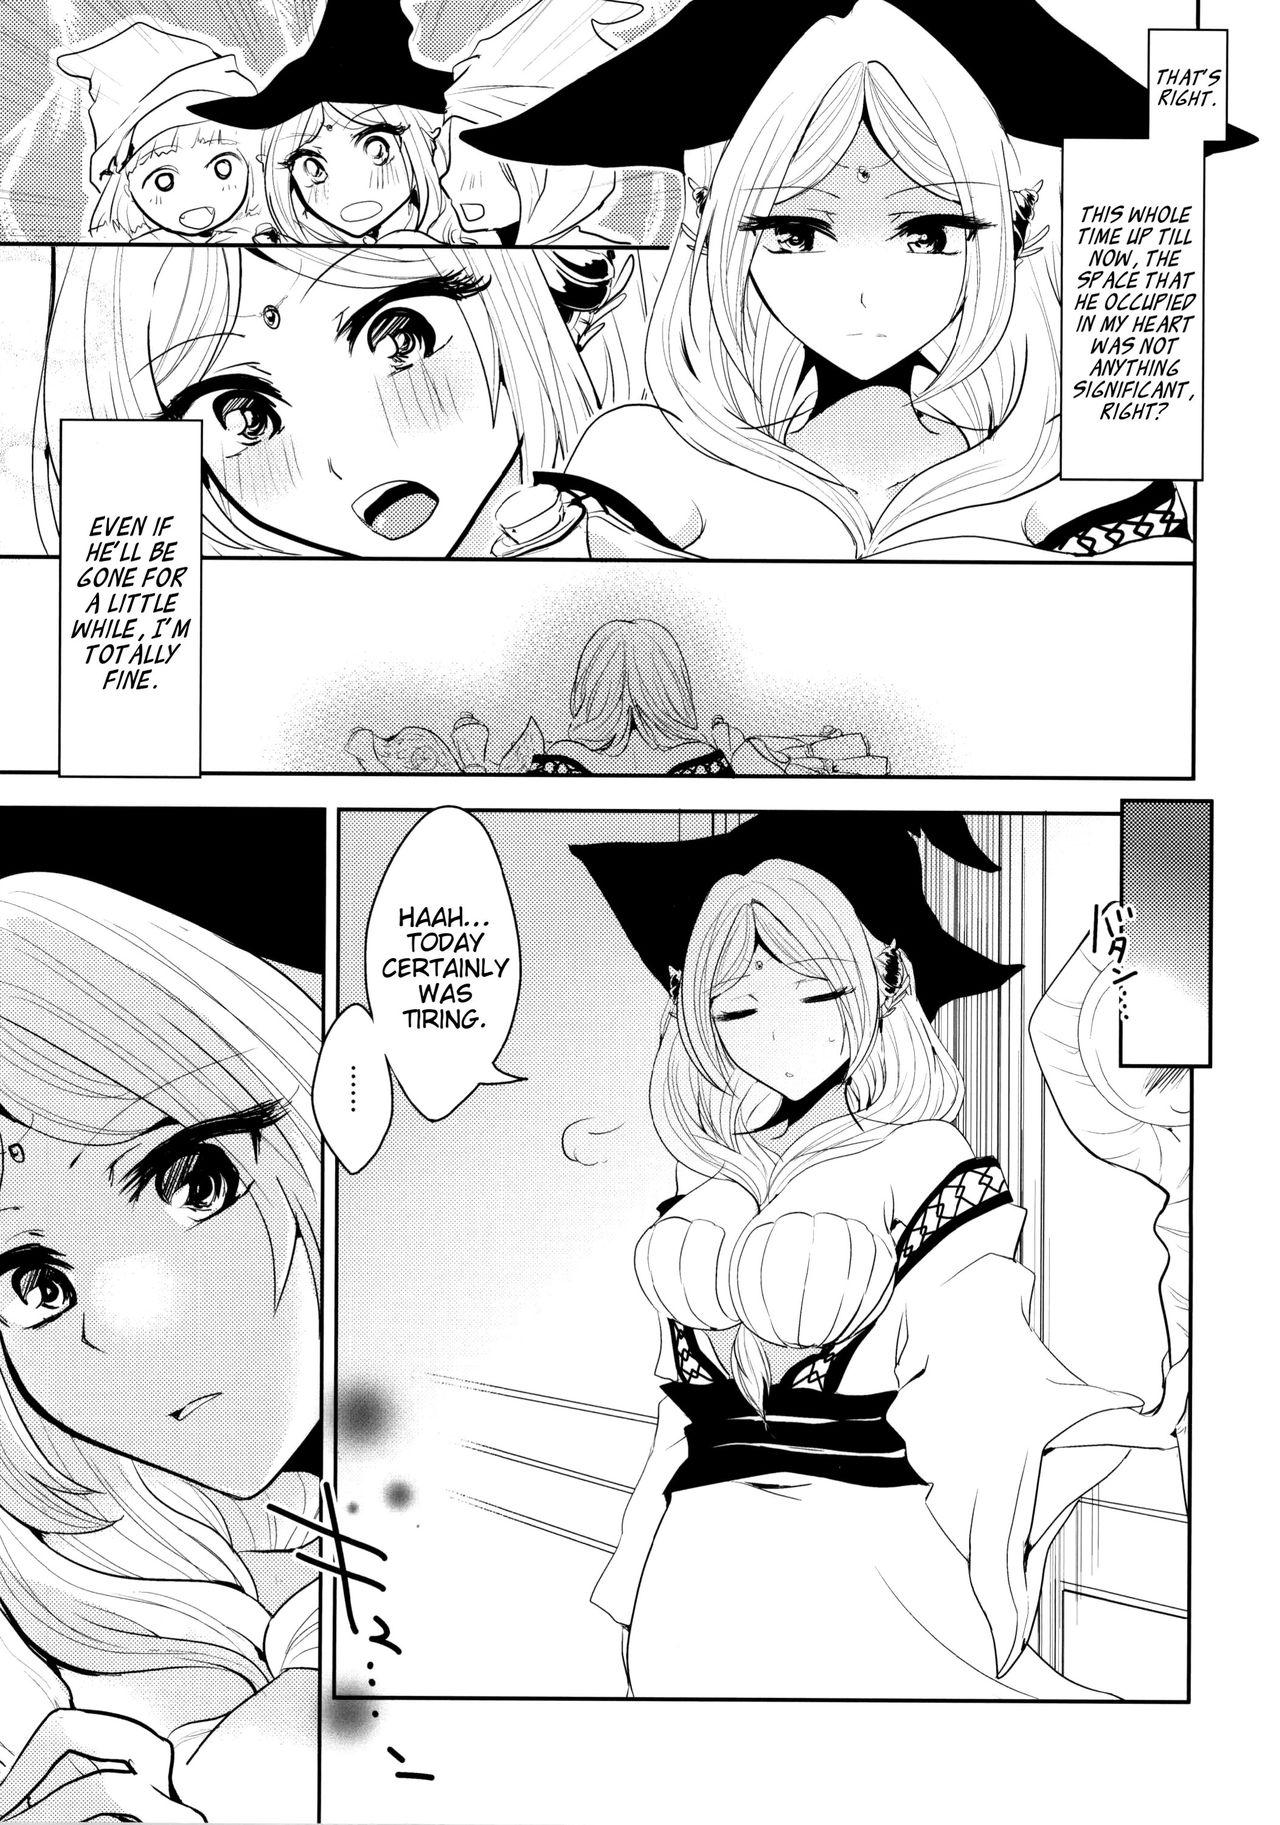 Trap s.t.a. - Magi the labyrinth of magic Reality Porn - Page 4